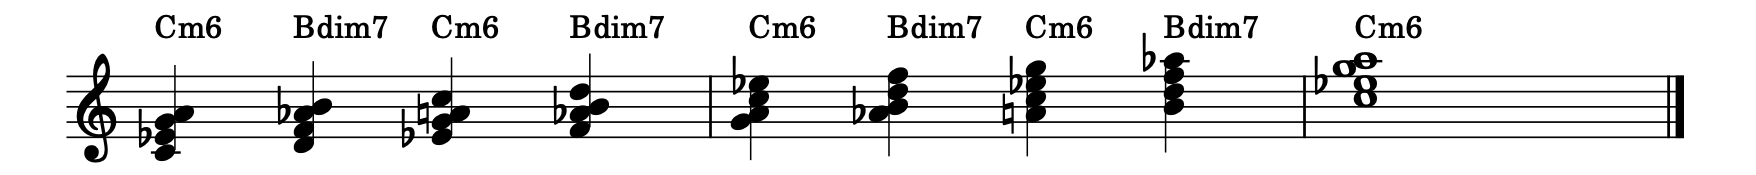 Minor 6th Diminished Scale of Chords